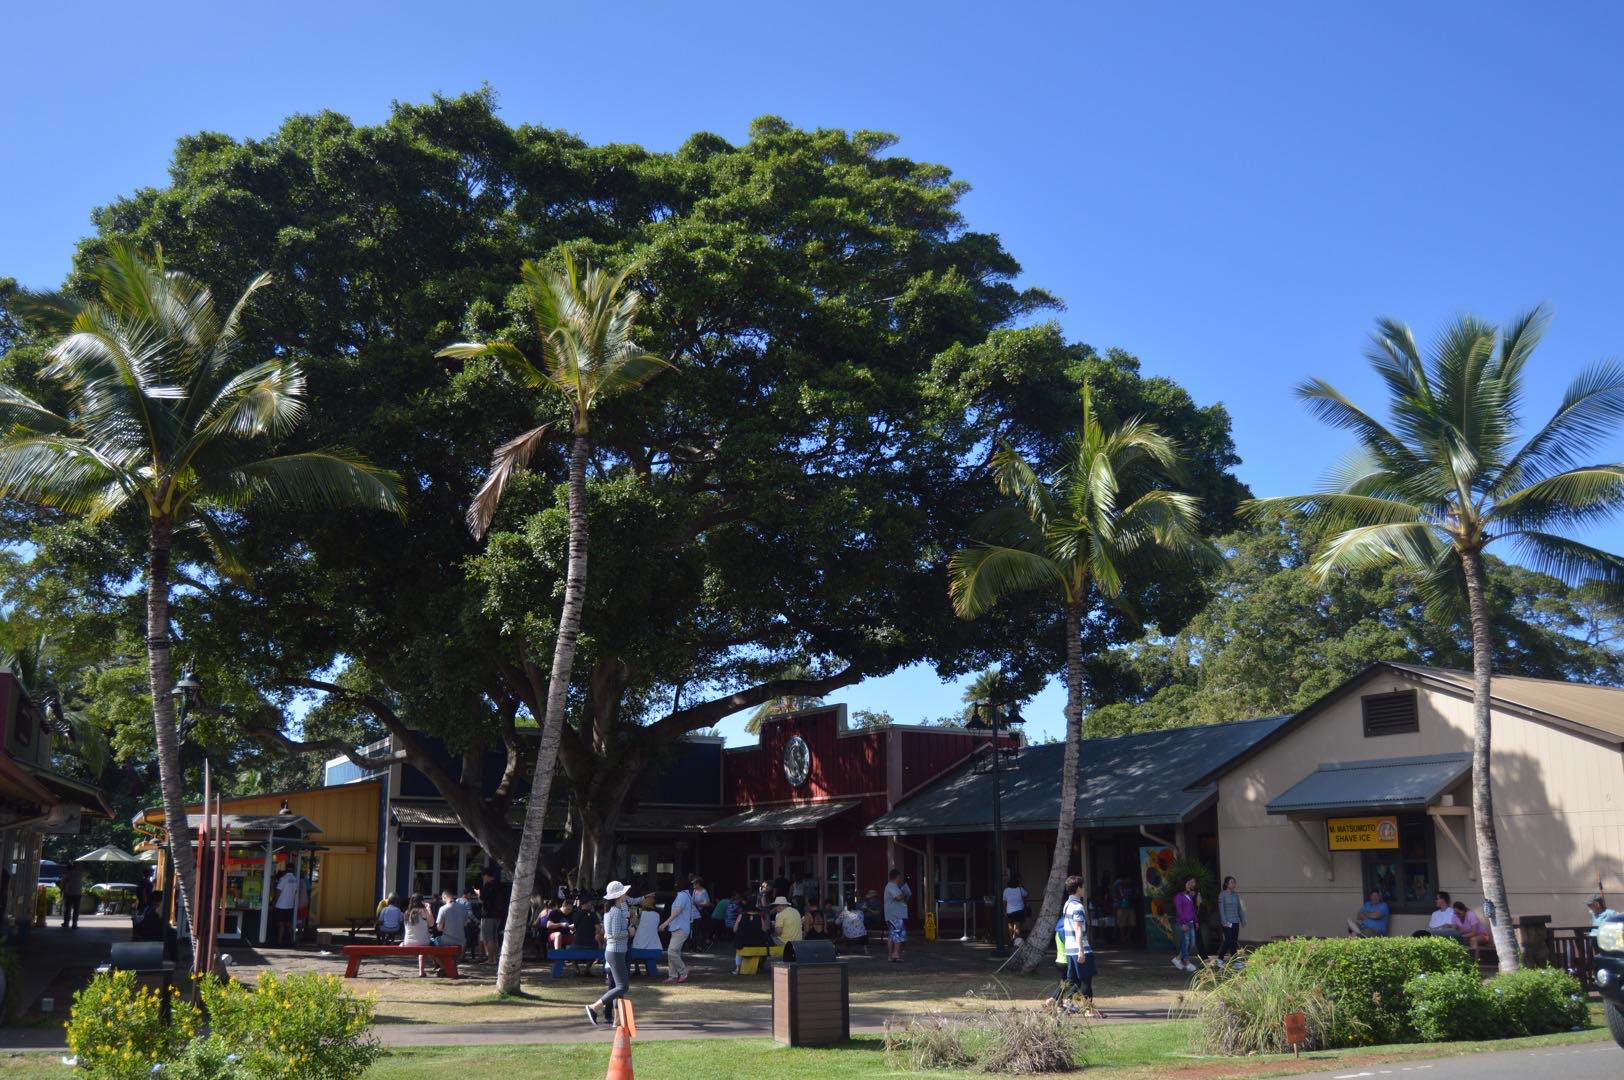 North Shore Marketplace in Oahu, Hawaii